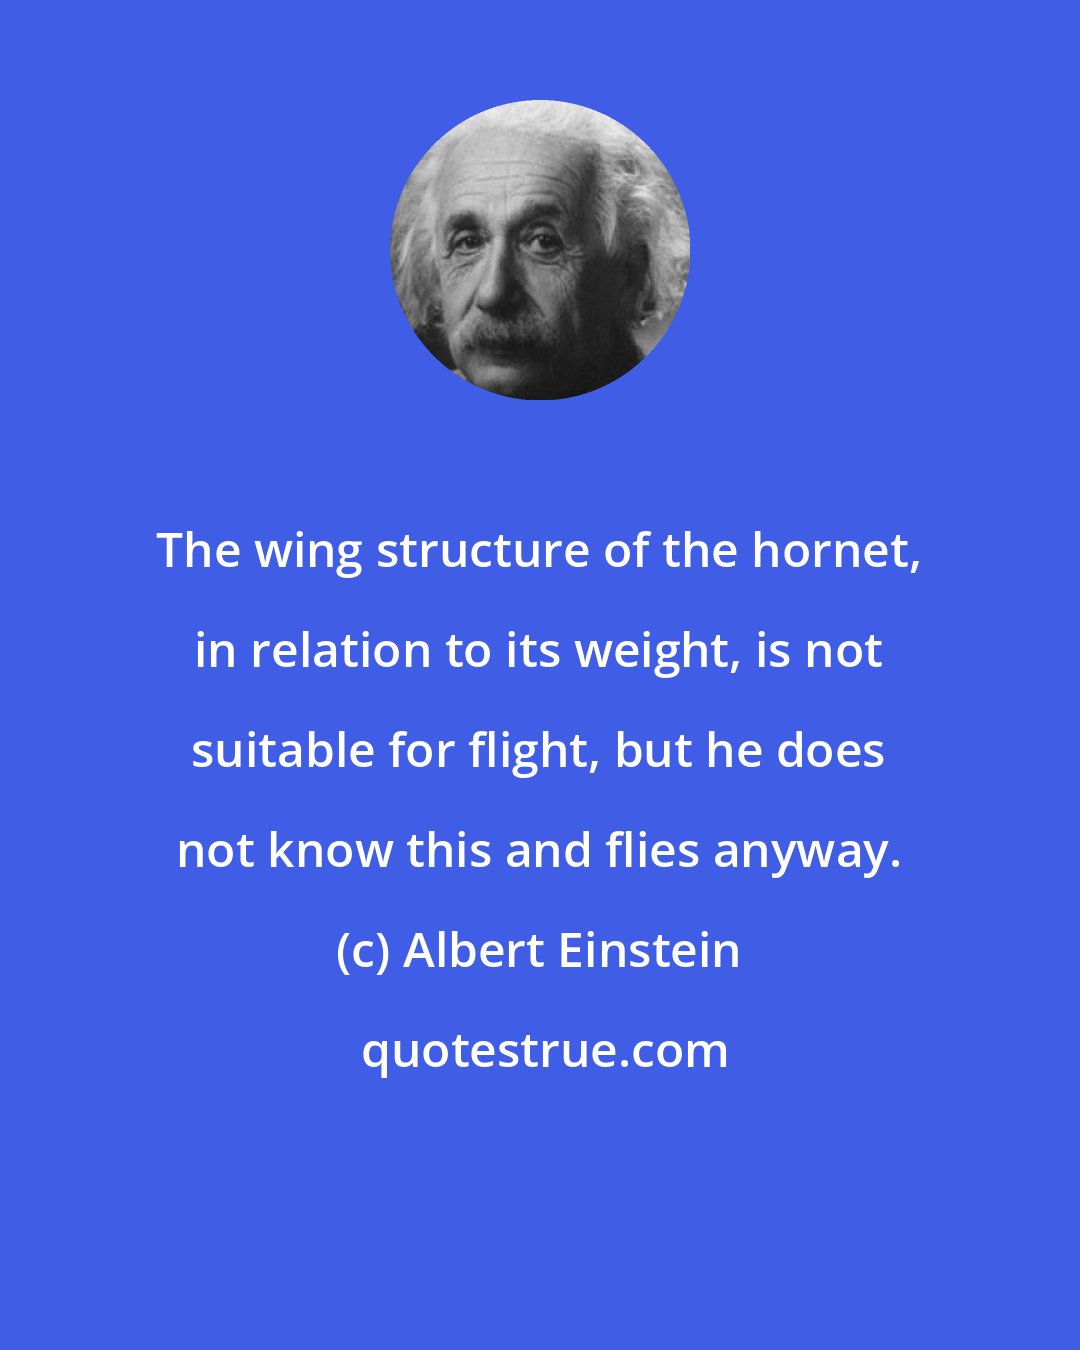 Albert Einstein: The wing structure of the hornet, in relation to its weight, is not suitable for flight, but he does not know this and flies anyway.